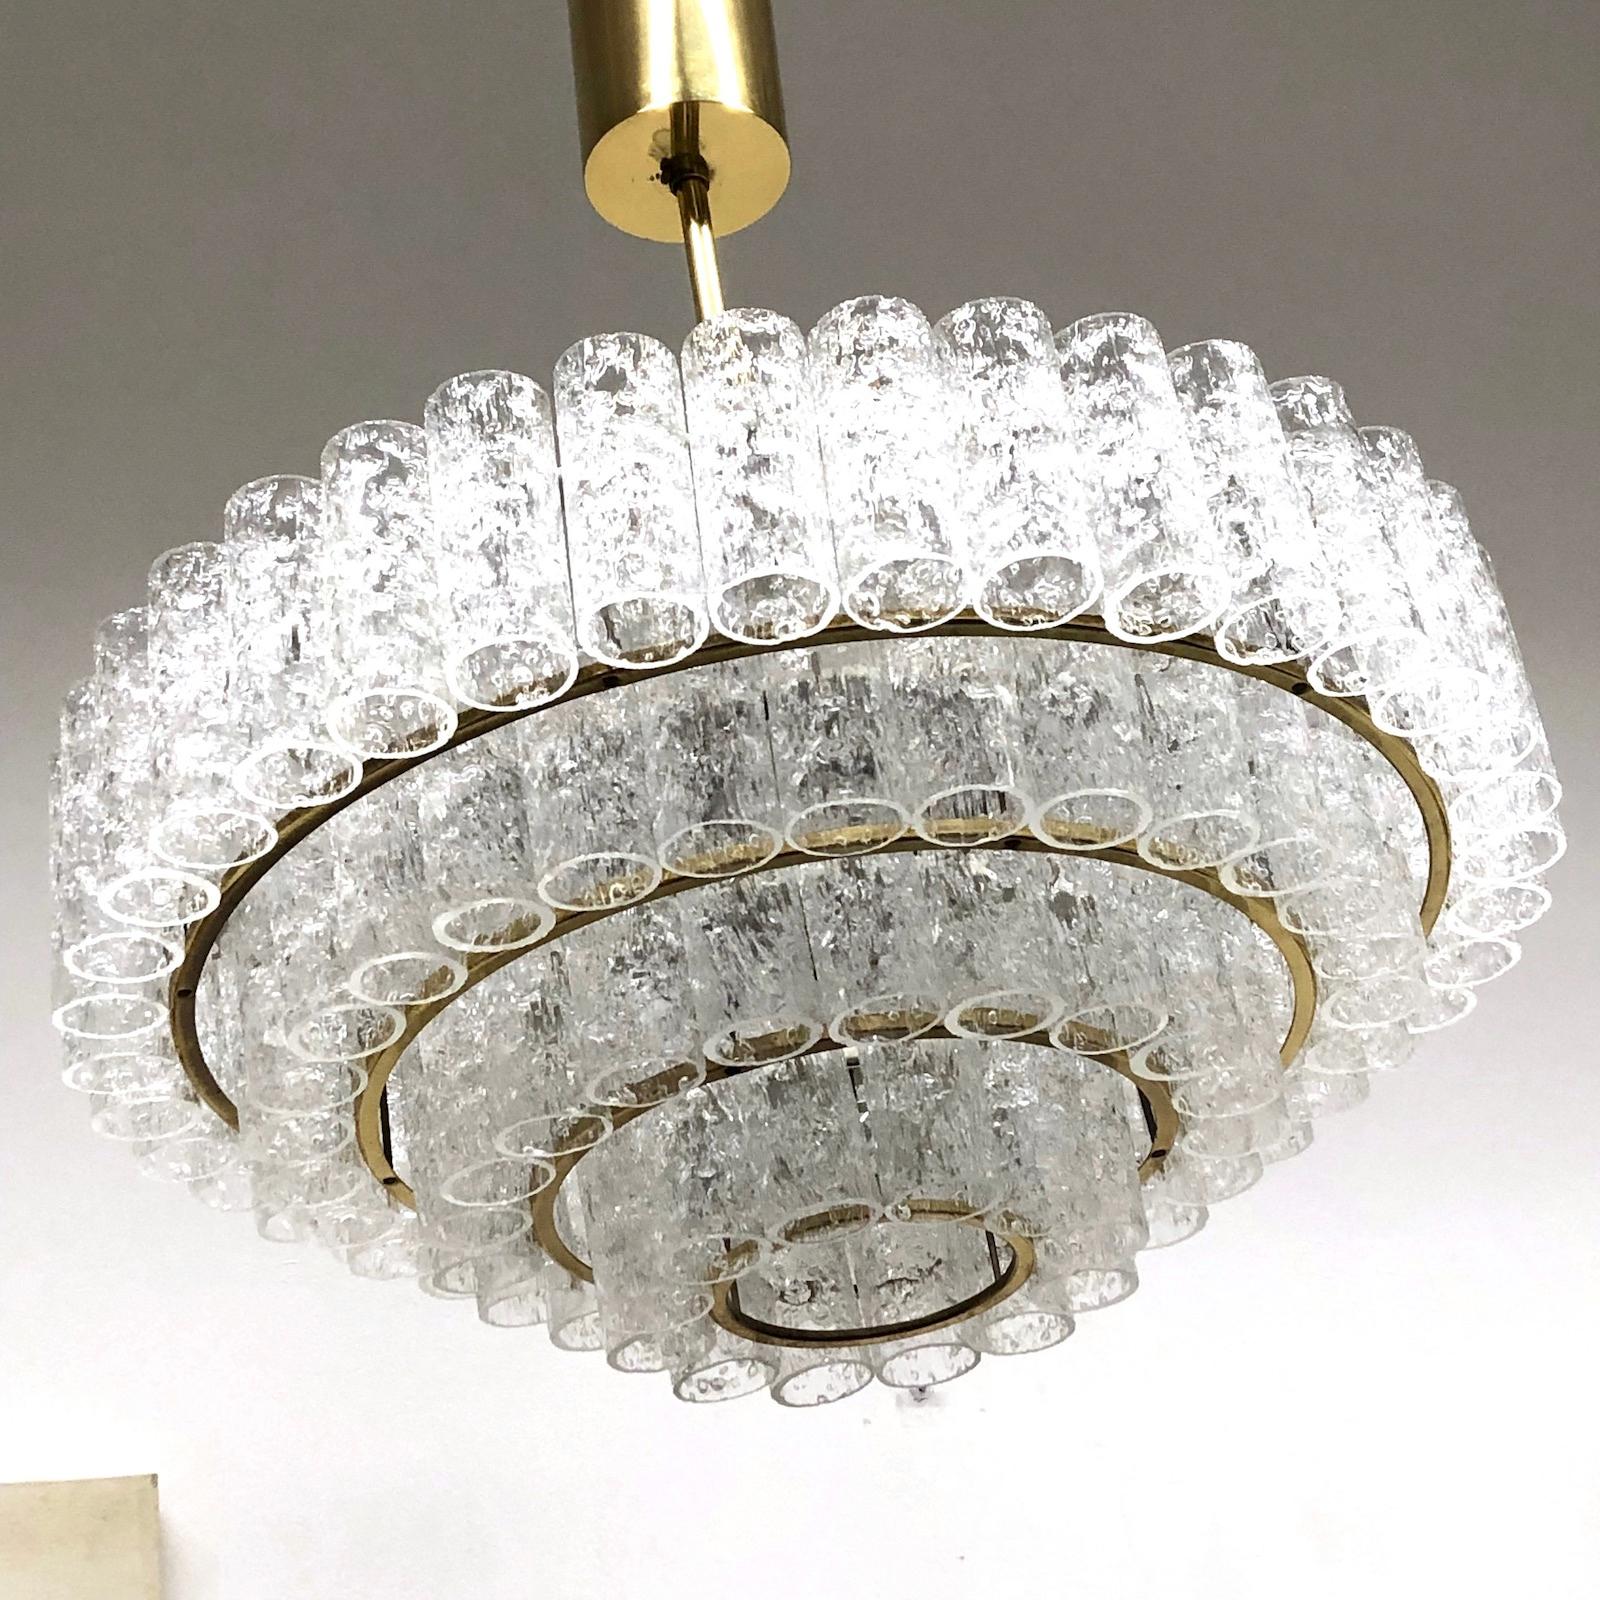 Large Four-Tier Glass Tube Chandelier by Doria Leuchten, Germany, 1960s (Metall)